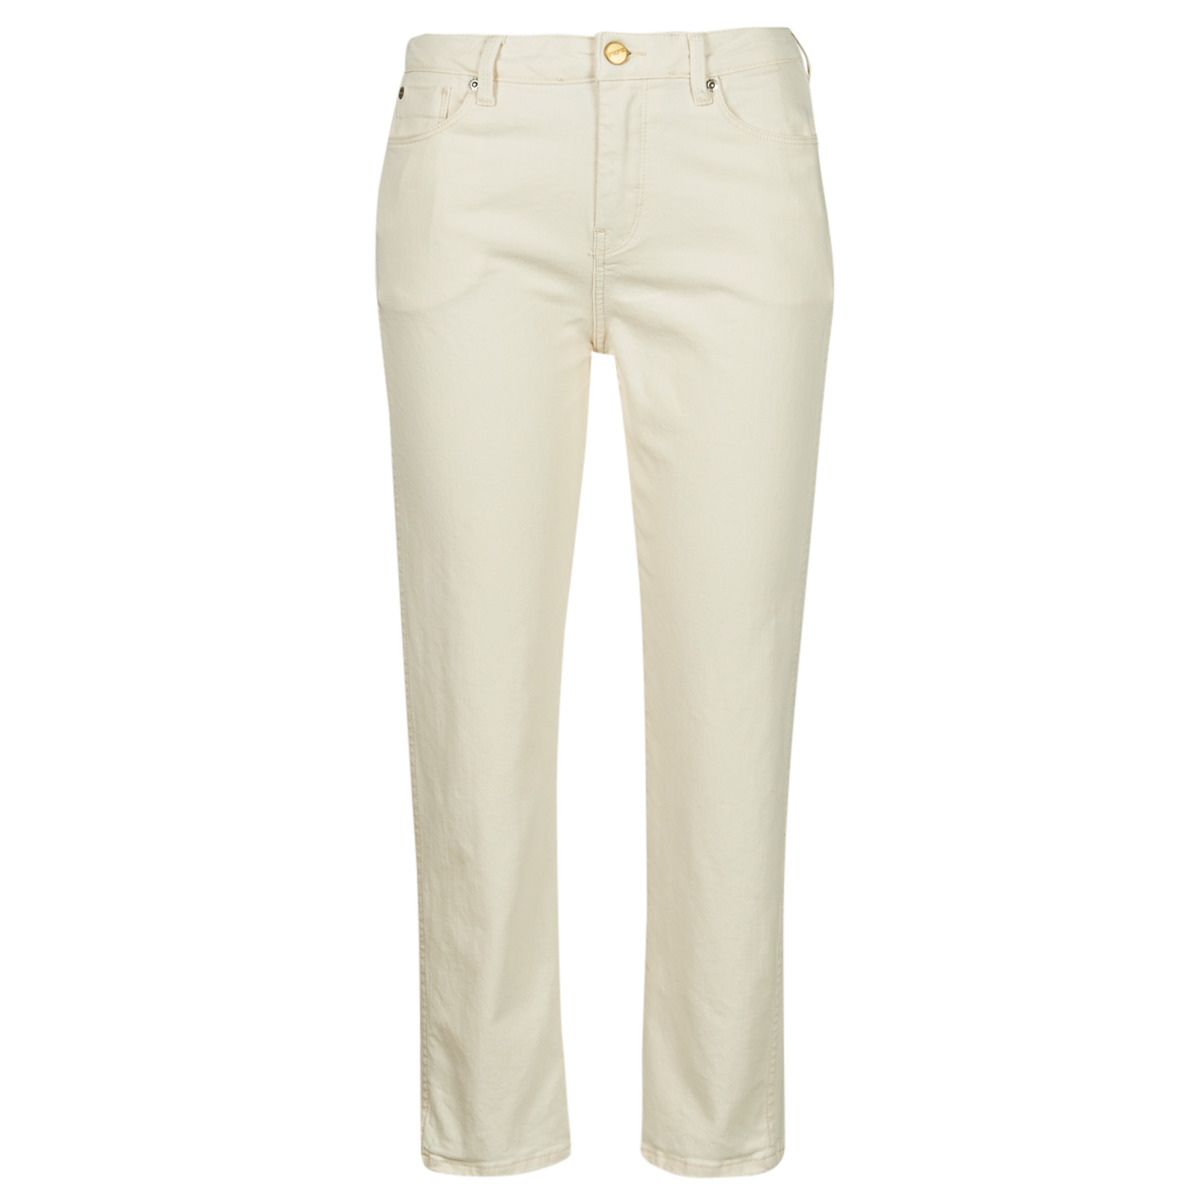 textil Dame Smalle jeans Pepe jeans DION 7/8 Beige